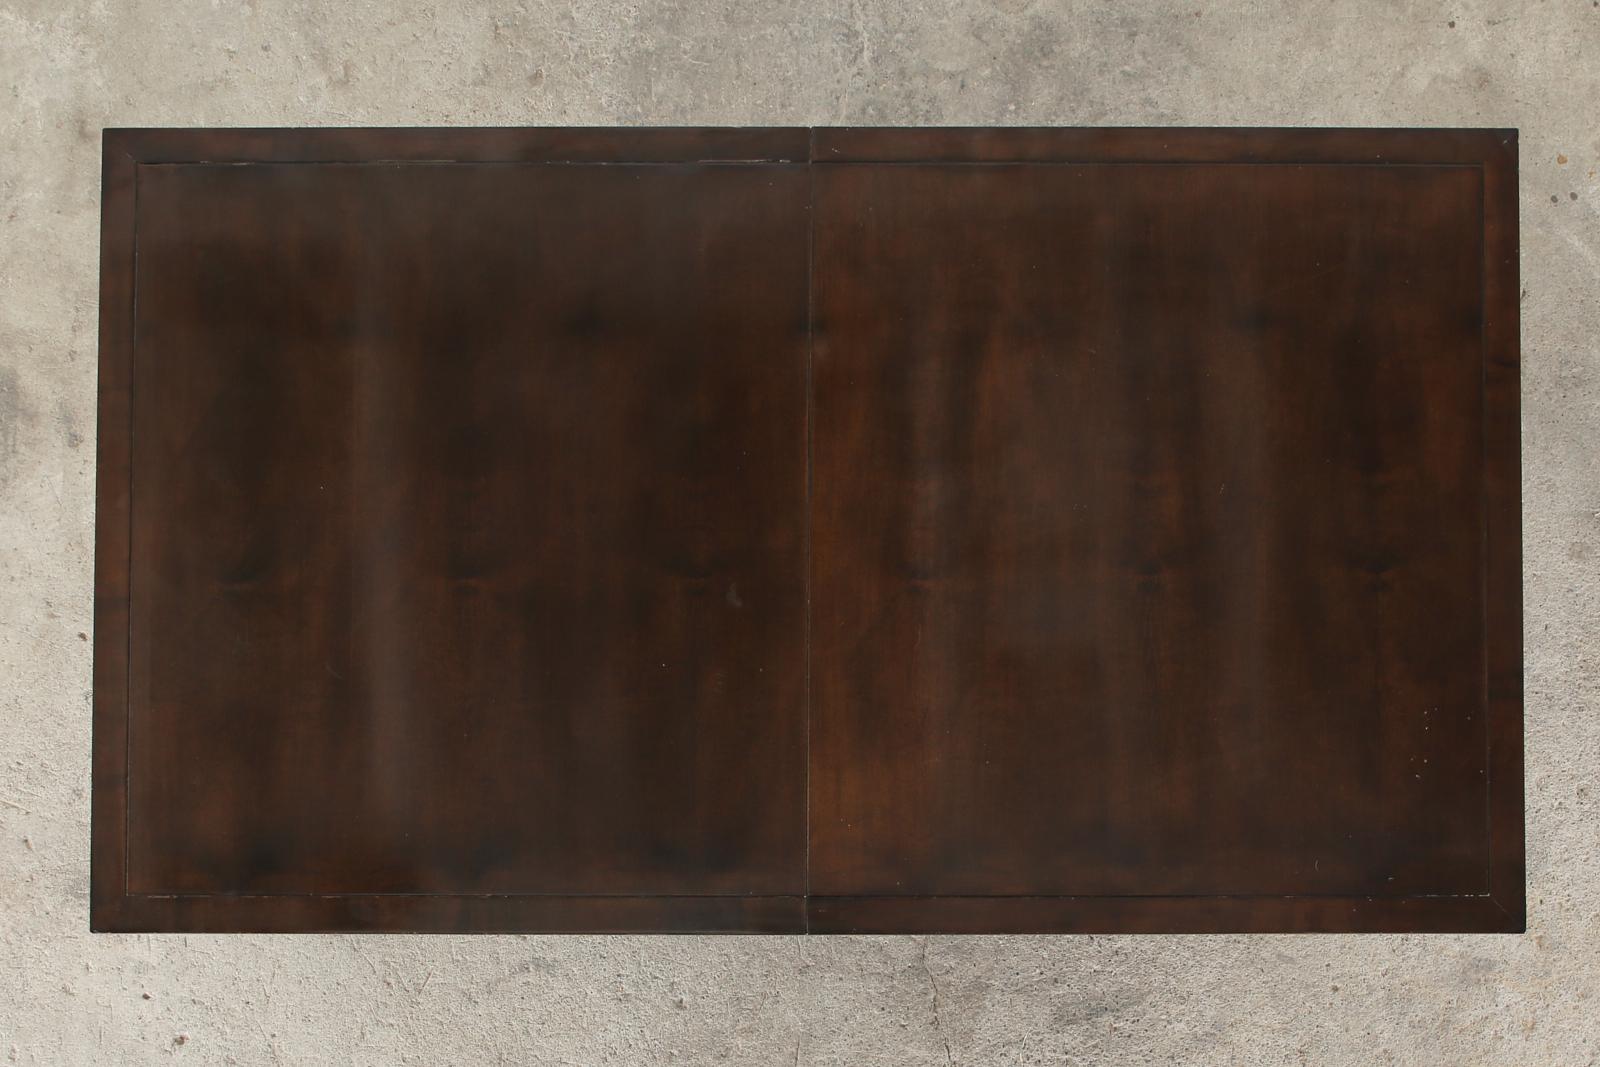 American Palazzo Walnut Dining Table by Orlando Diaz-Azcuy for McGuire